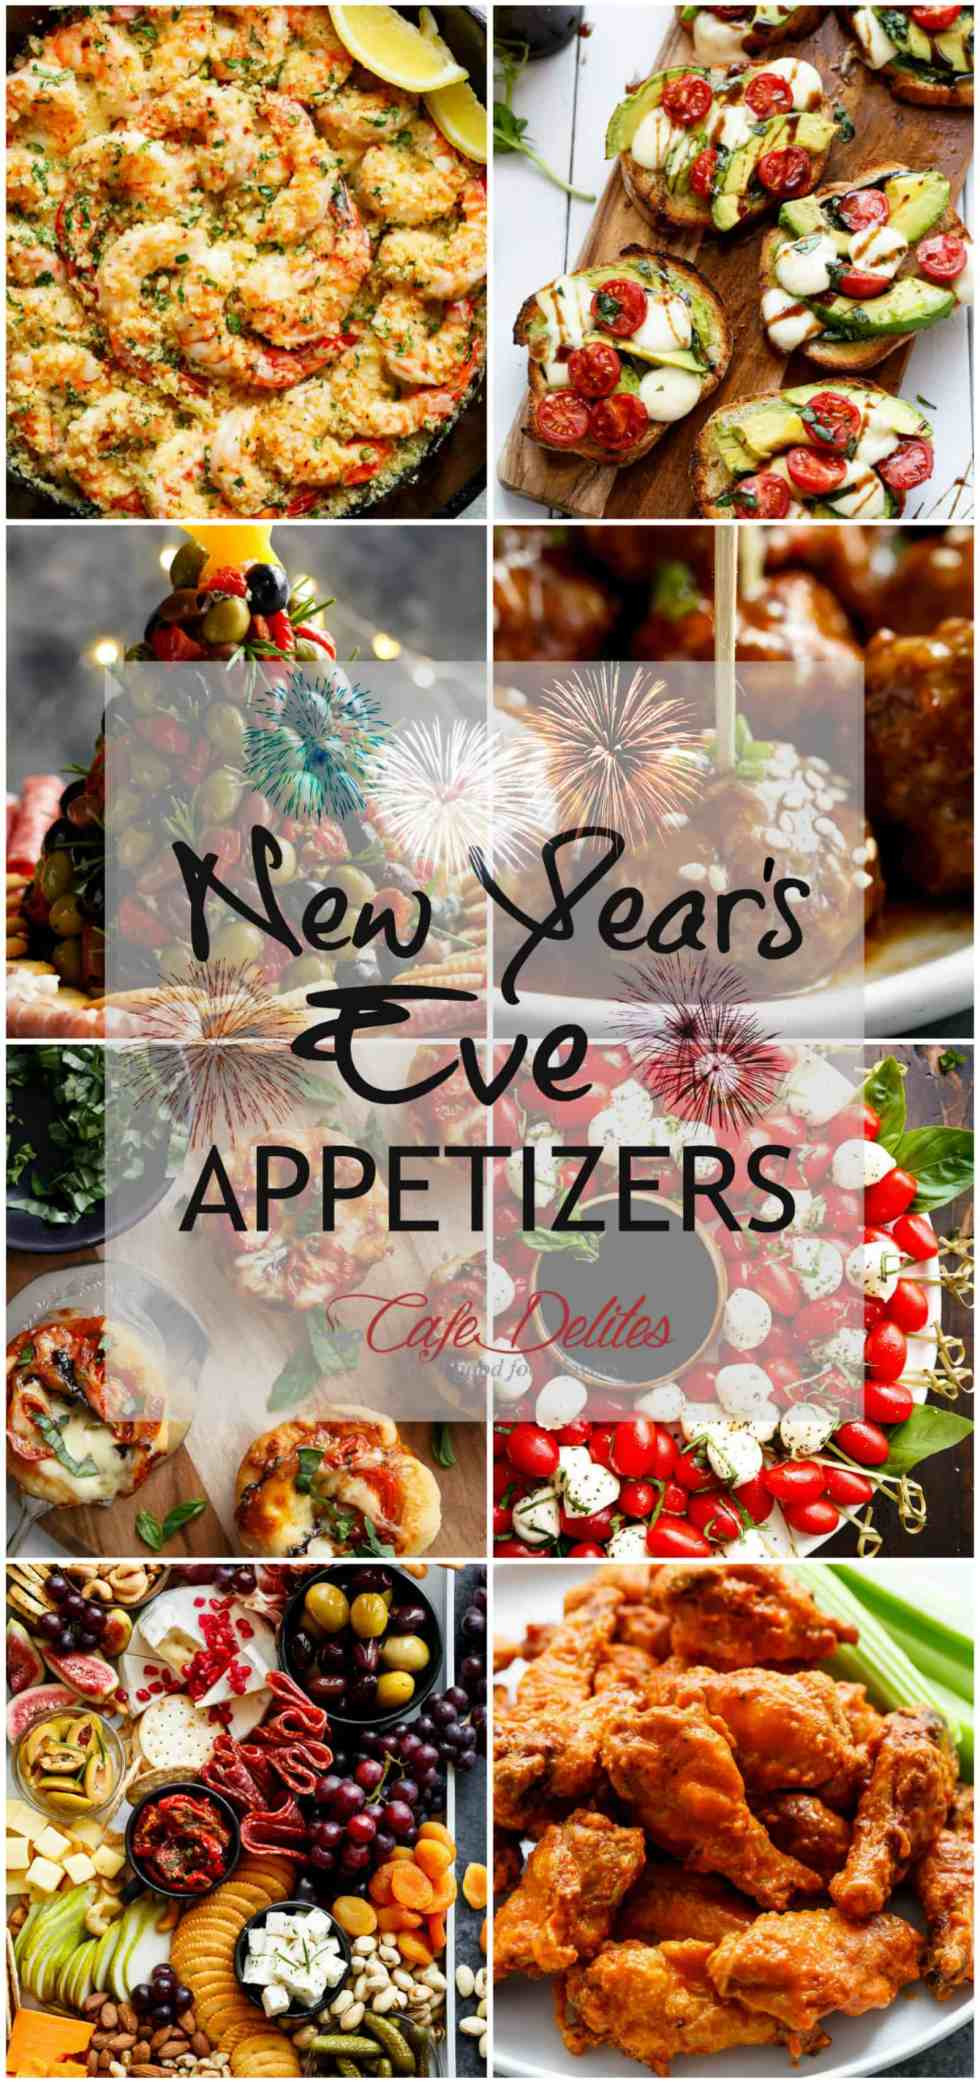 Appetizers For New Years Eve Party
 The Best New Year s Eve Appetizers Cafe Delites